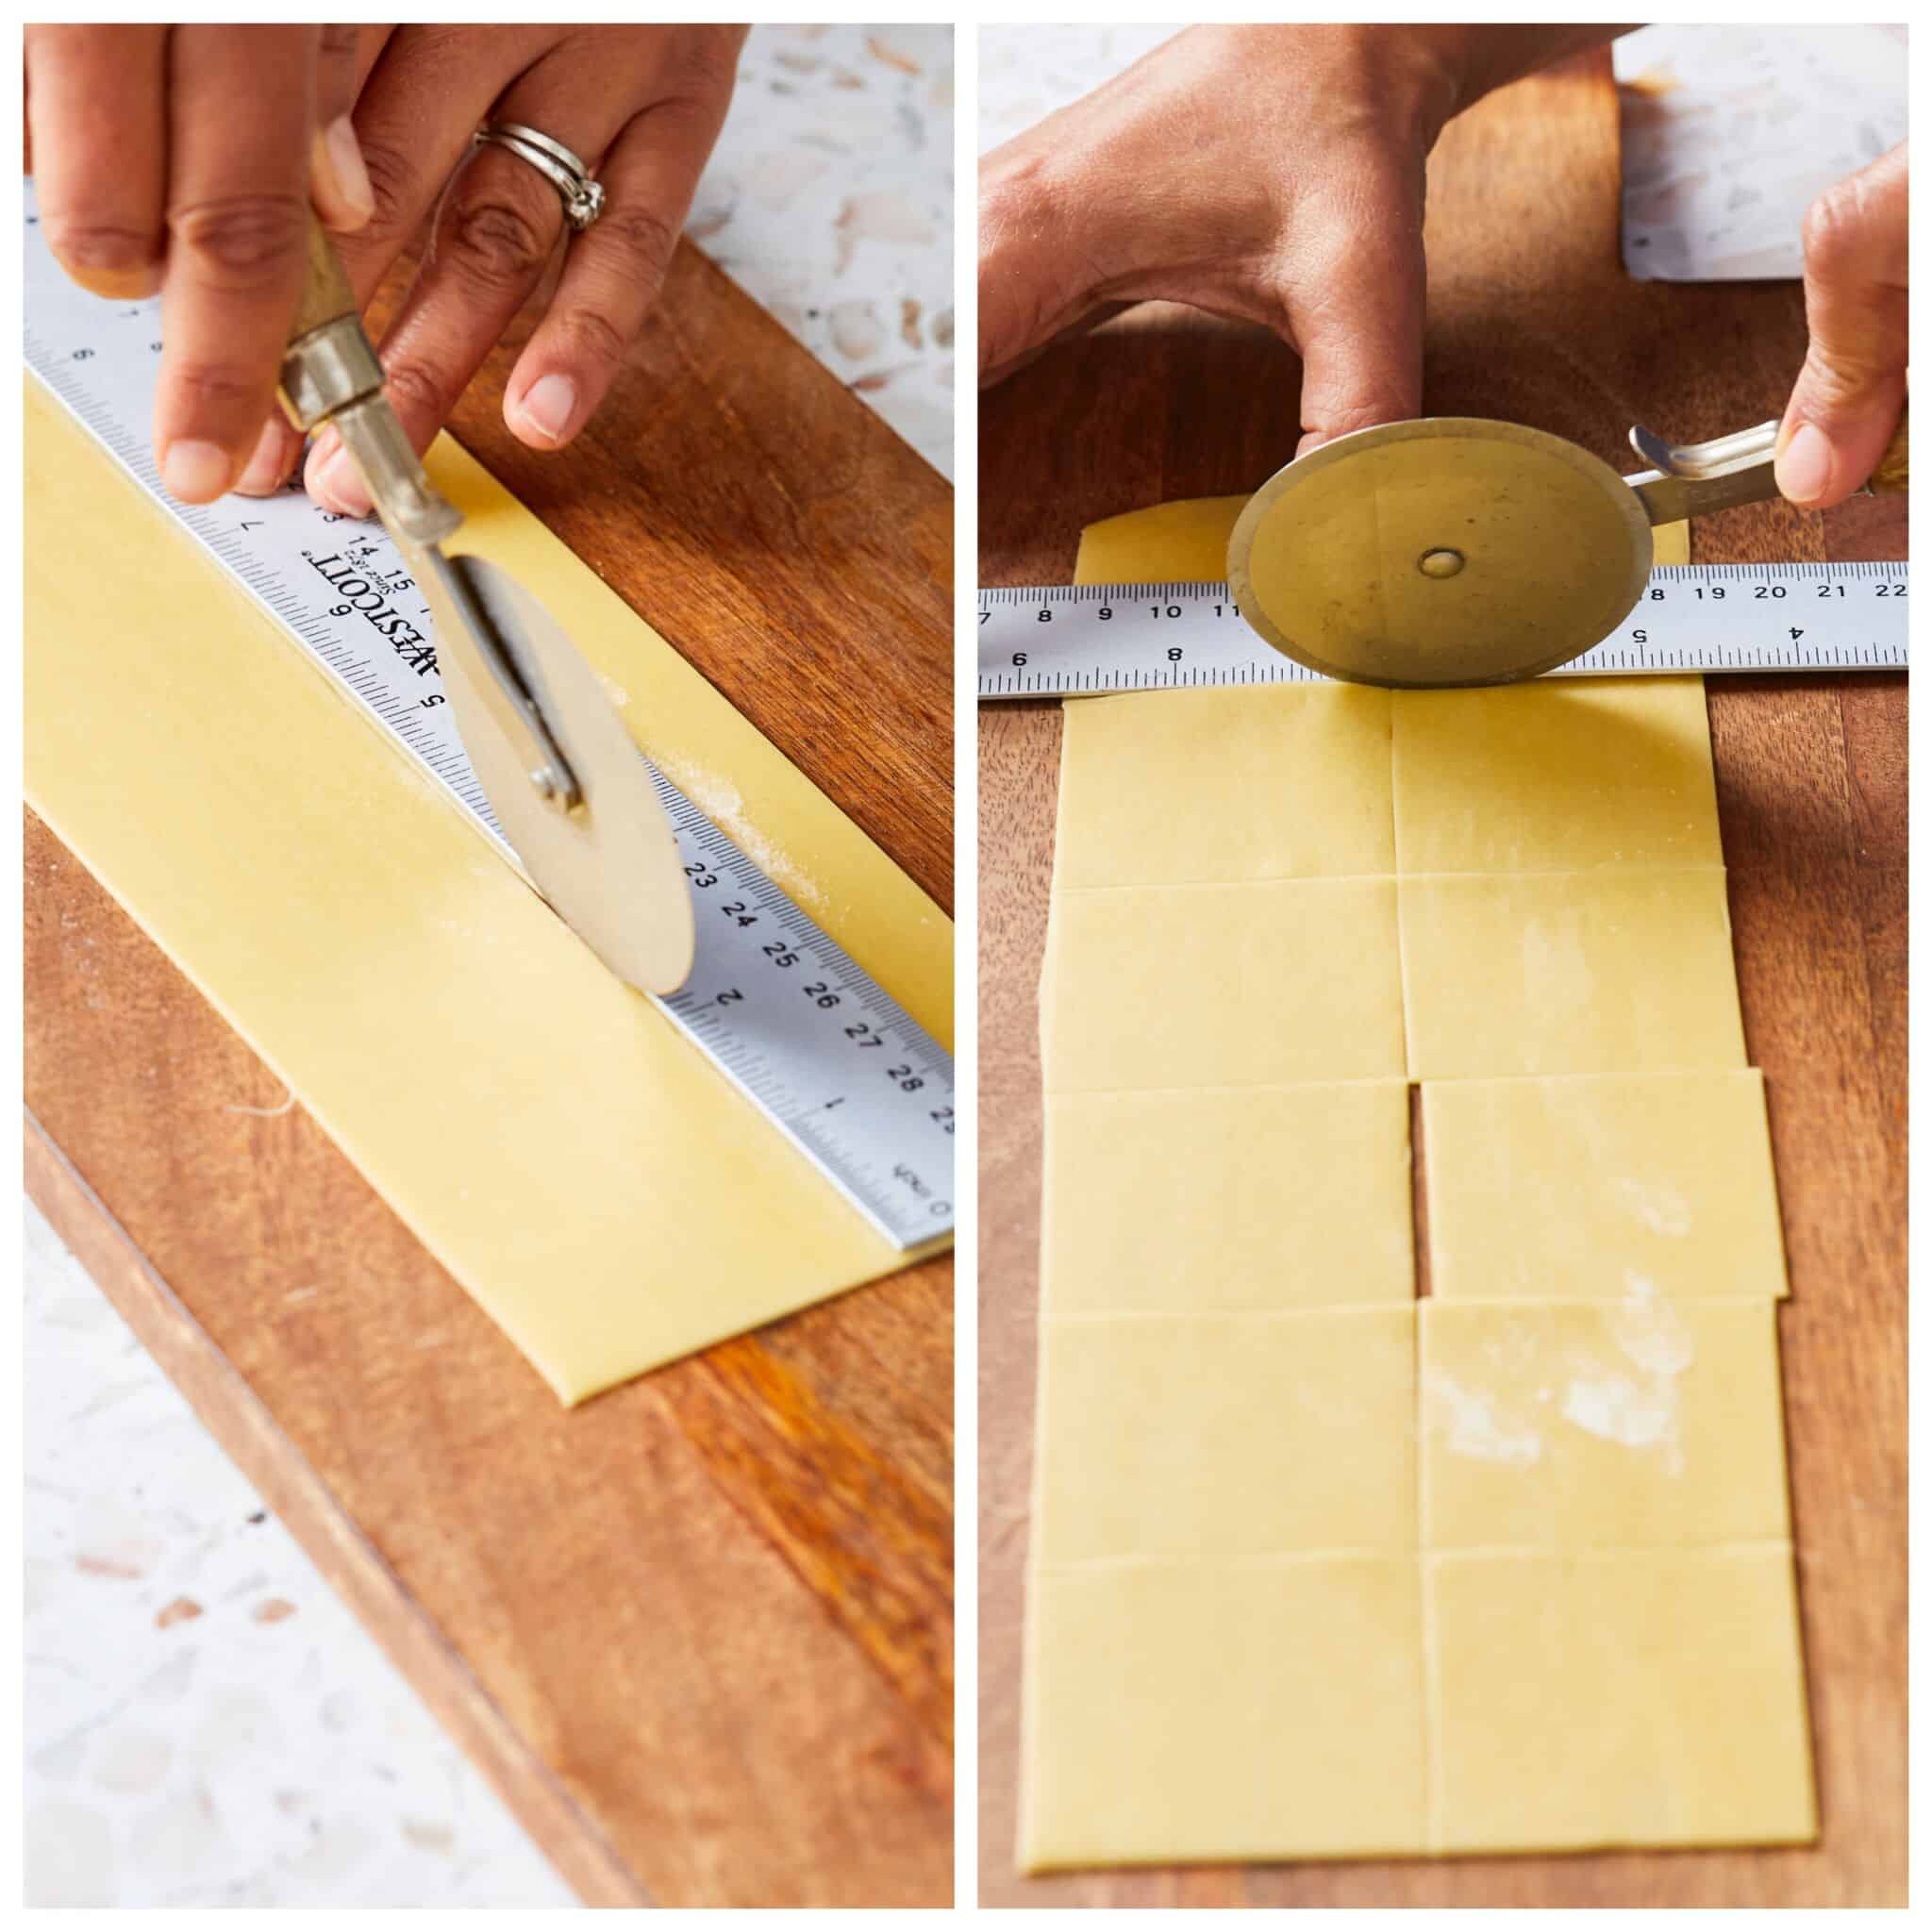 After rolling out the dough, cut the dough into 2-inch squares. Cover the remaining squares with a dish towel.